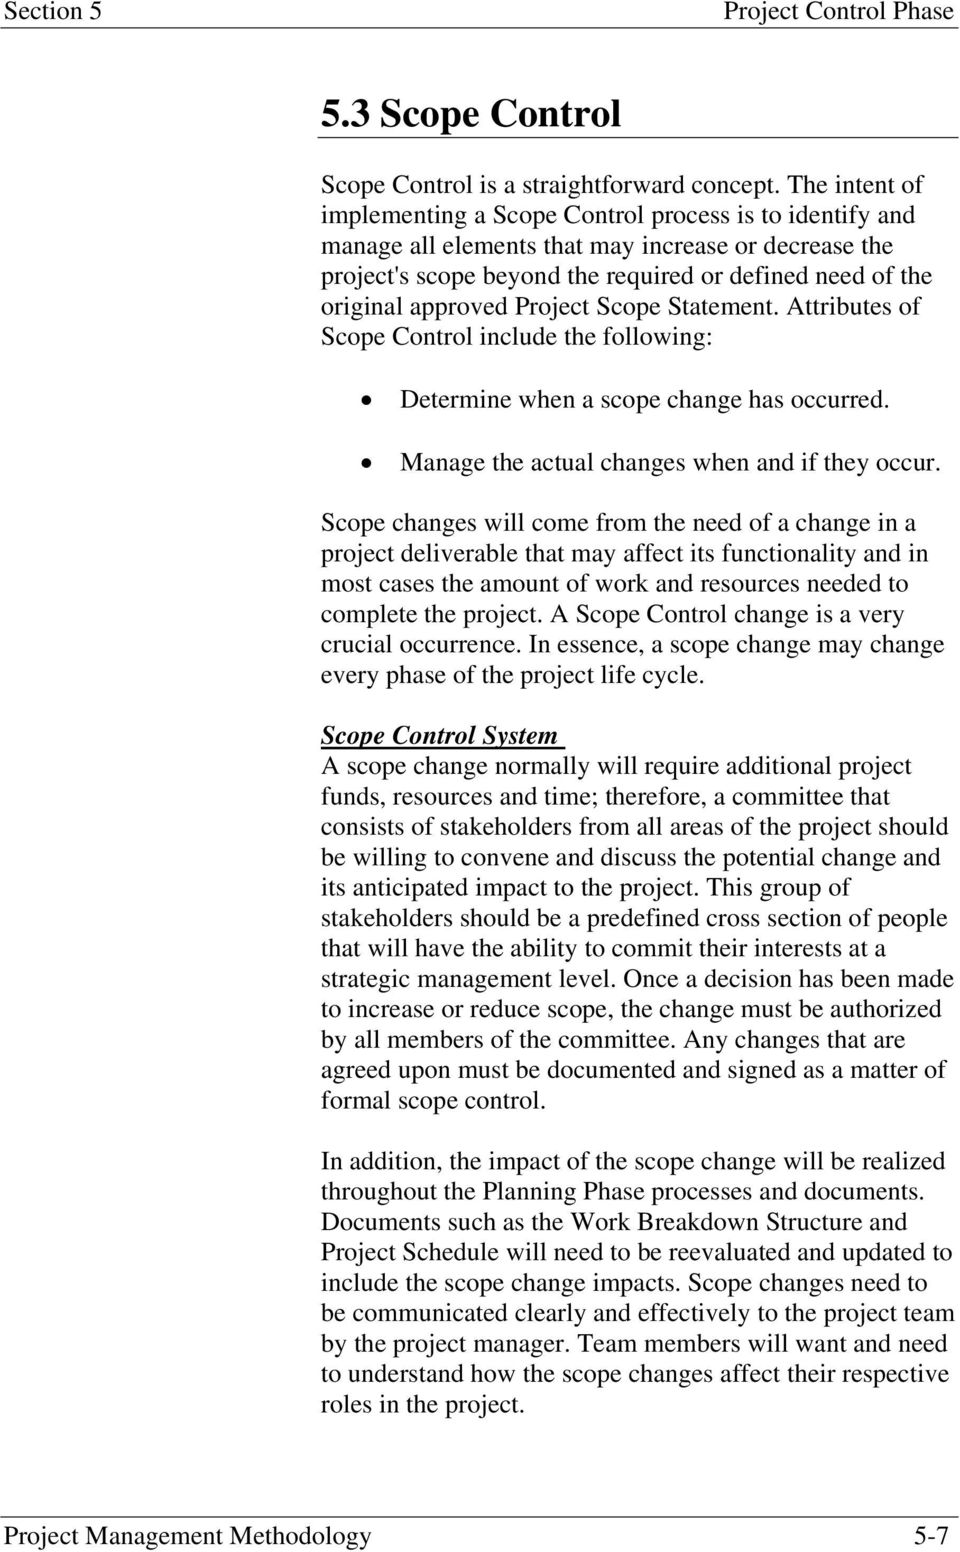 approved Project Scope Statement. Attributes of Scope Control include the following: Determine when a scope change has occurred. Manage the actual changes when and if they occur.